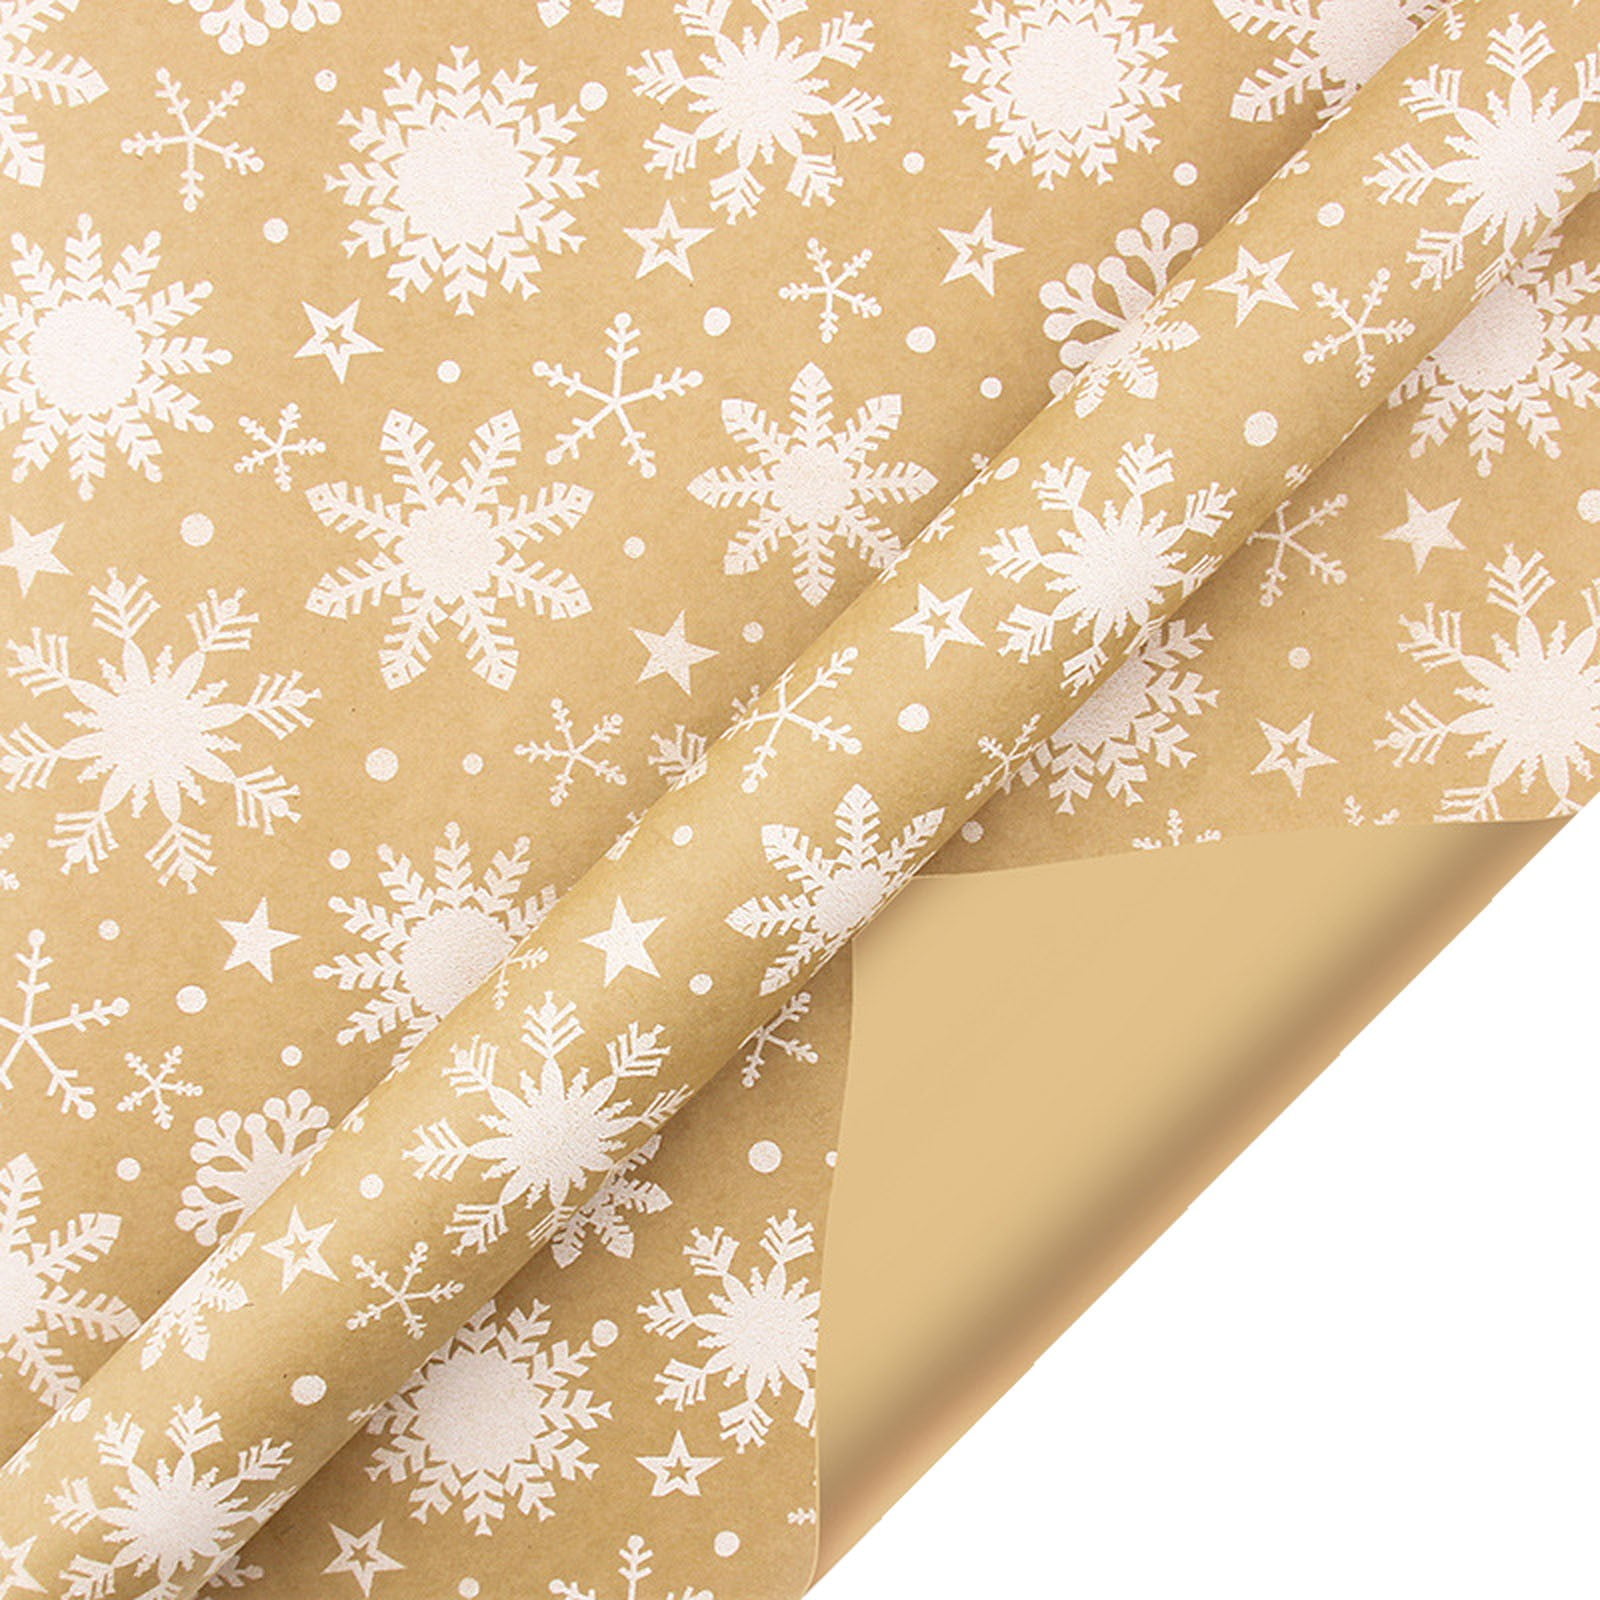 Kraft Paper Wrapping Paper Sheet Christmas Gift Box Double Sided